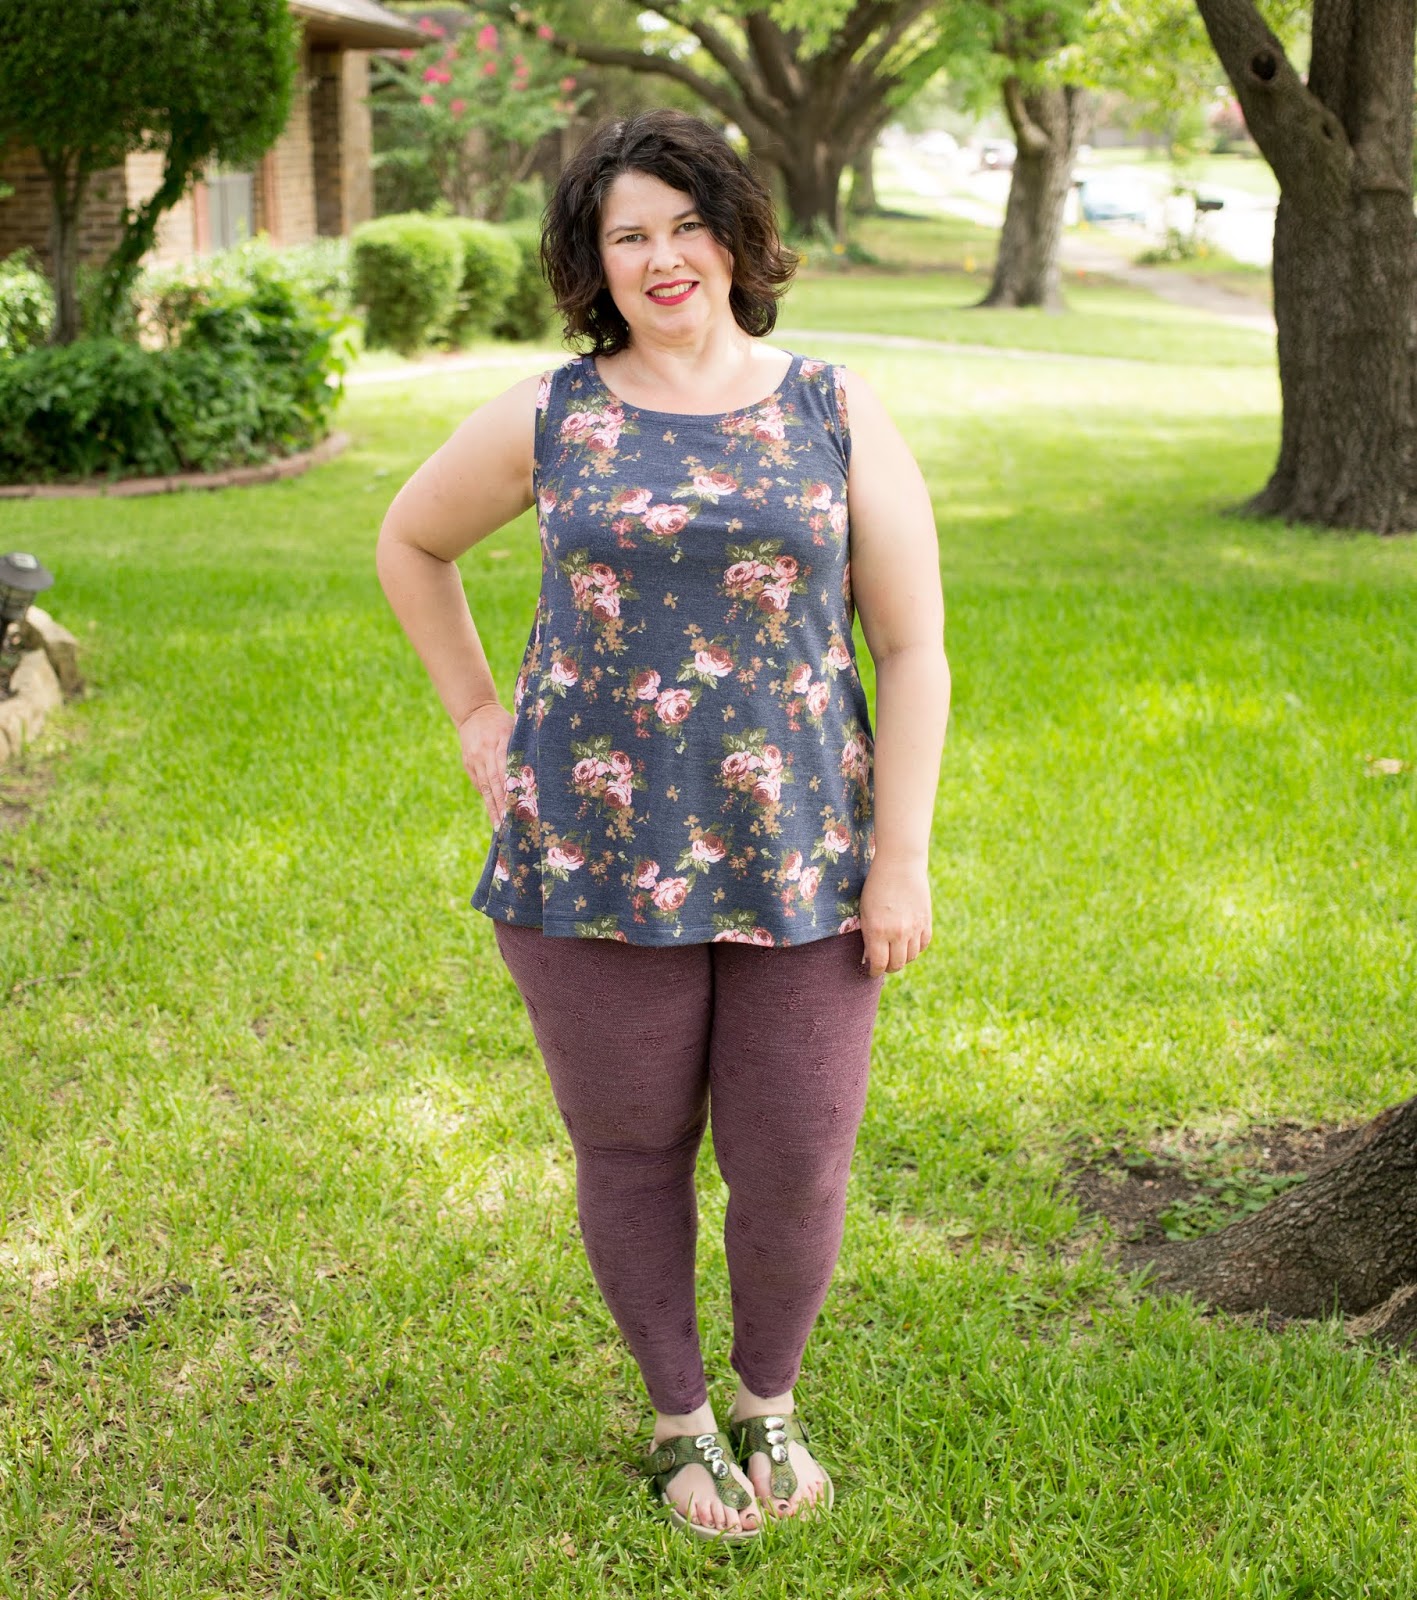 Sewing Scientist: Fabric Choice When Sewing a Loose Tank